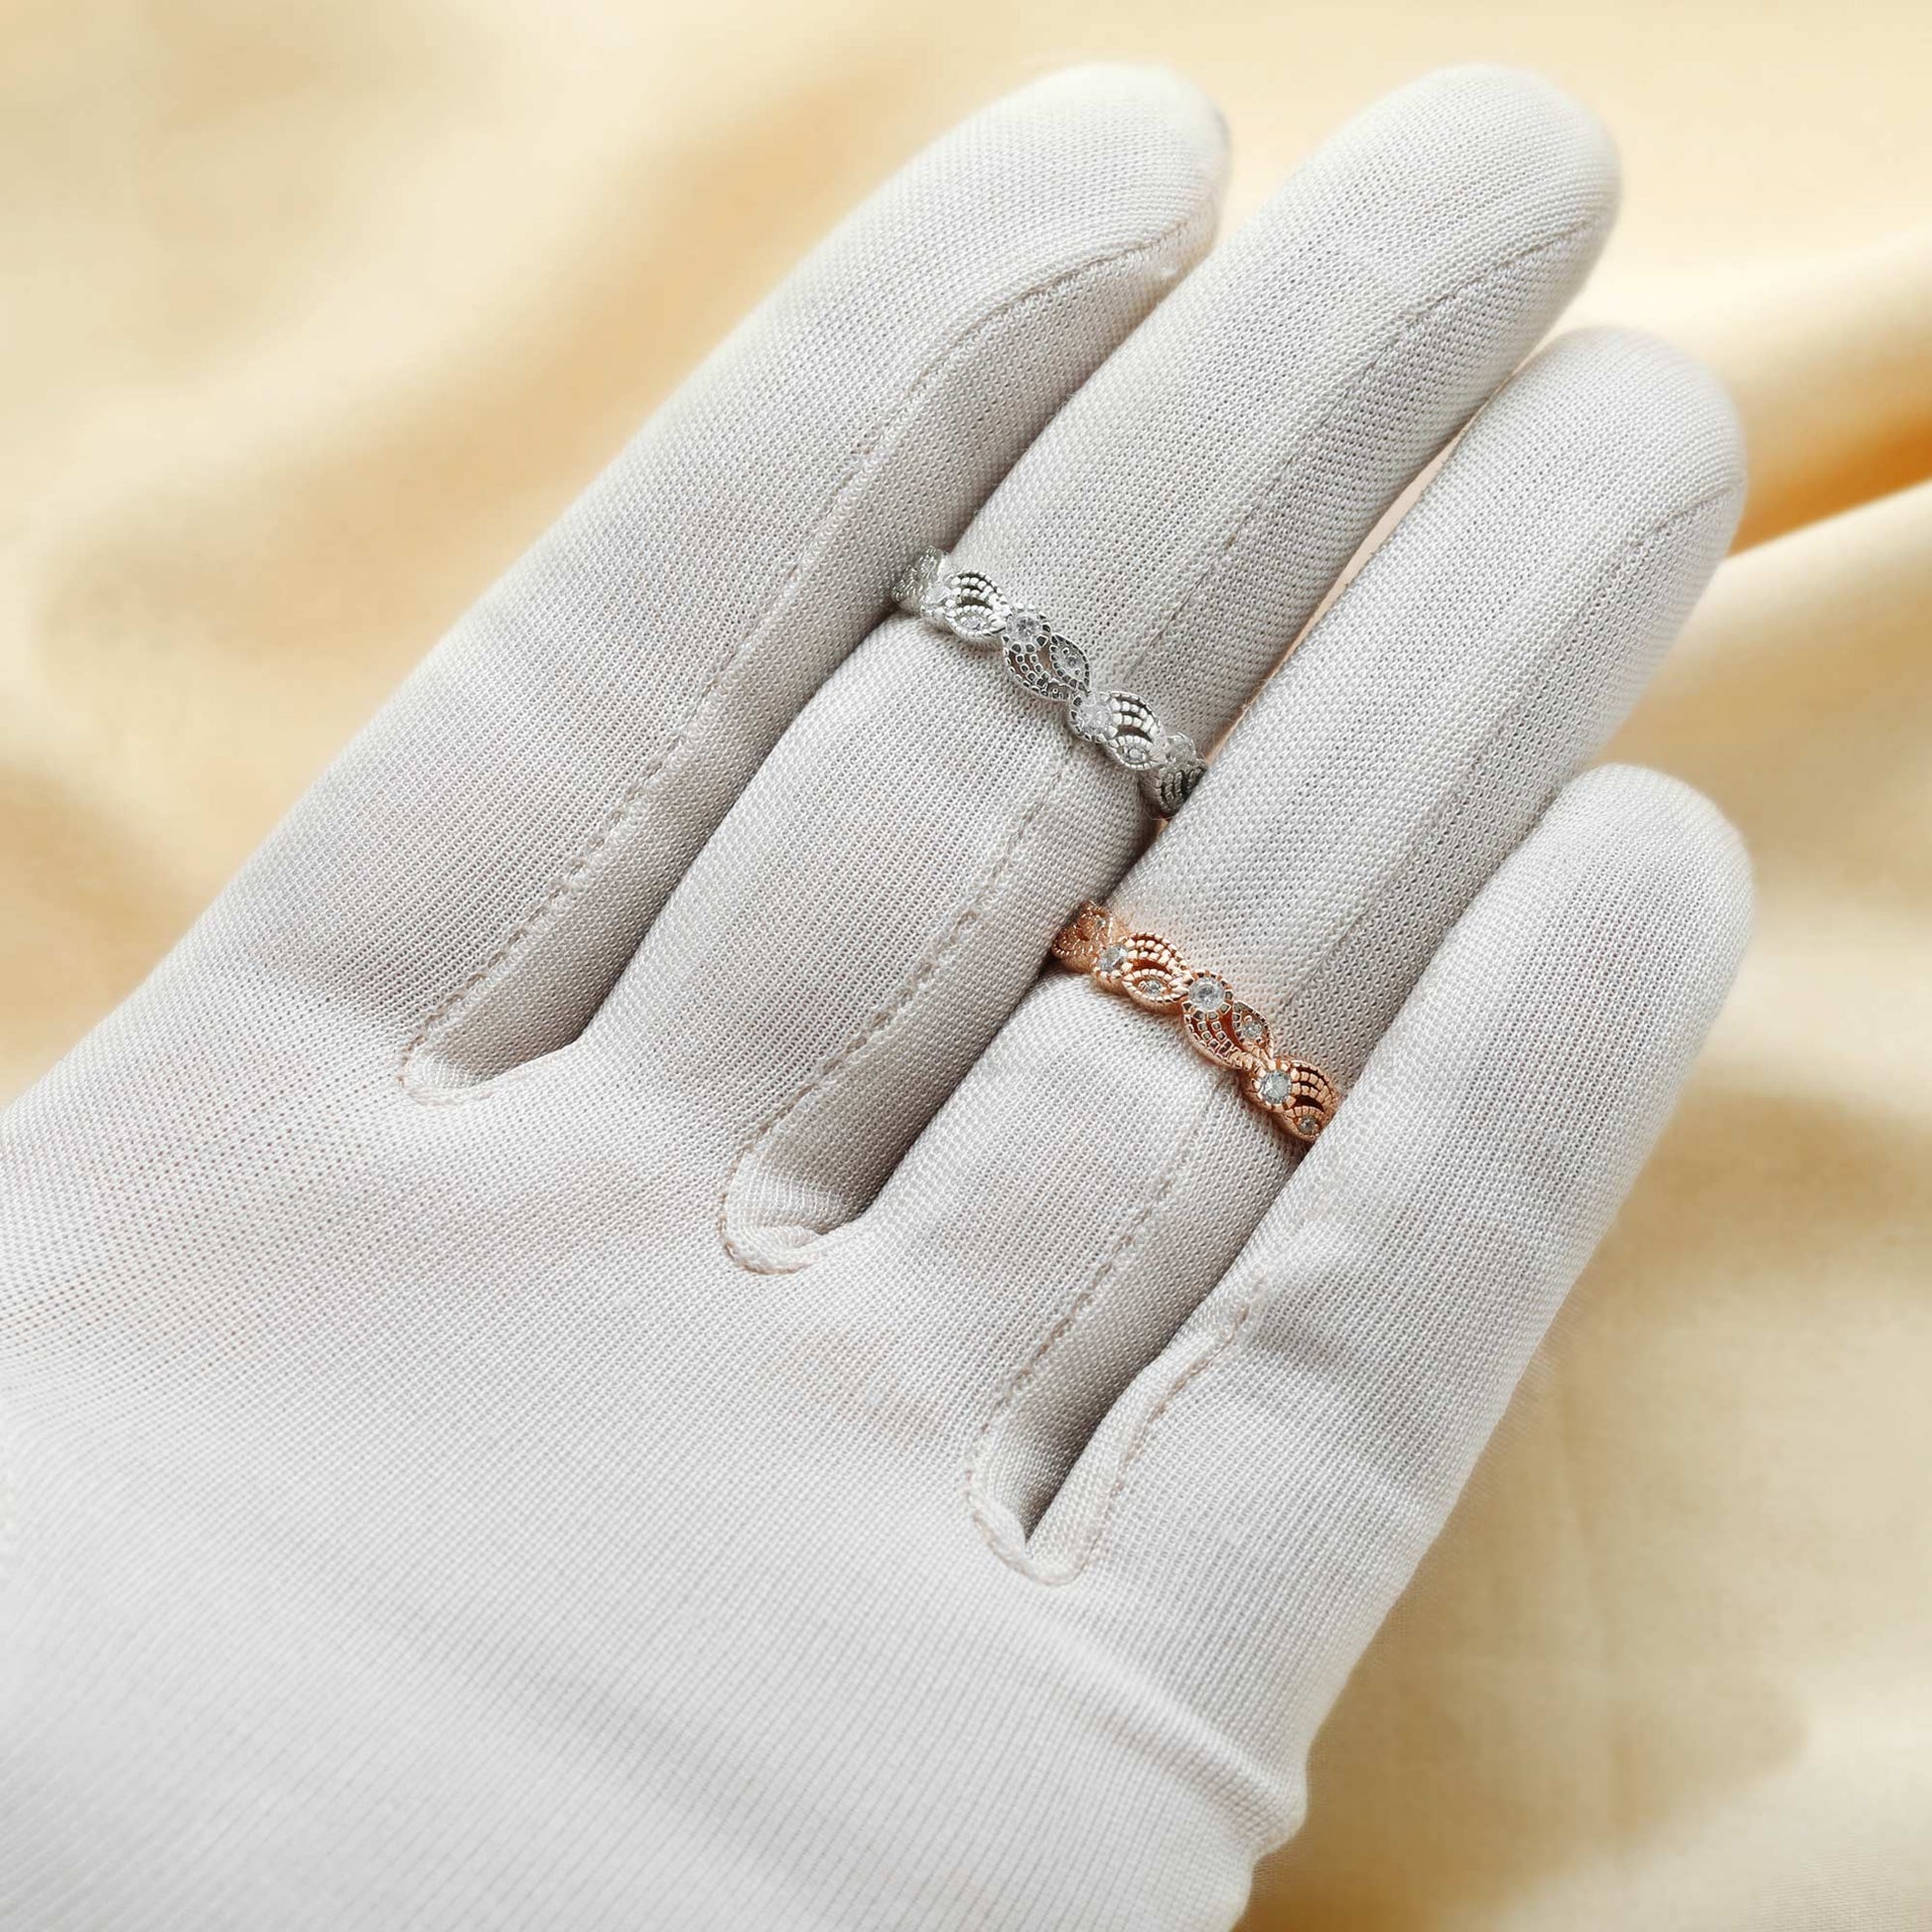 A hand wearing one silver and one rose gold swirl and leaf designed bands set with clear small gems.